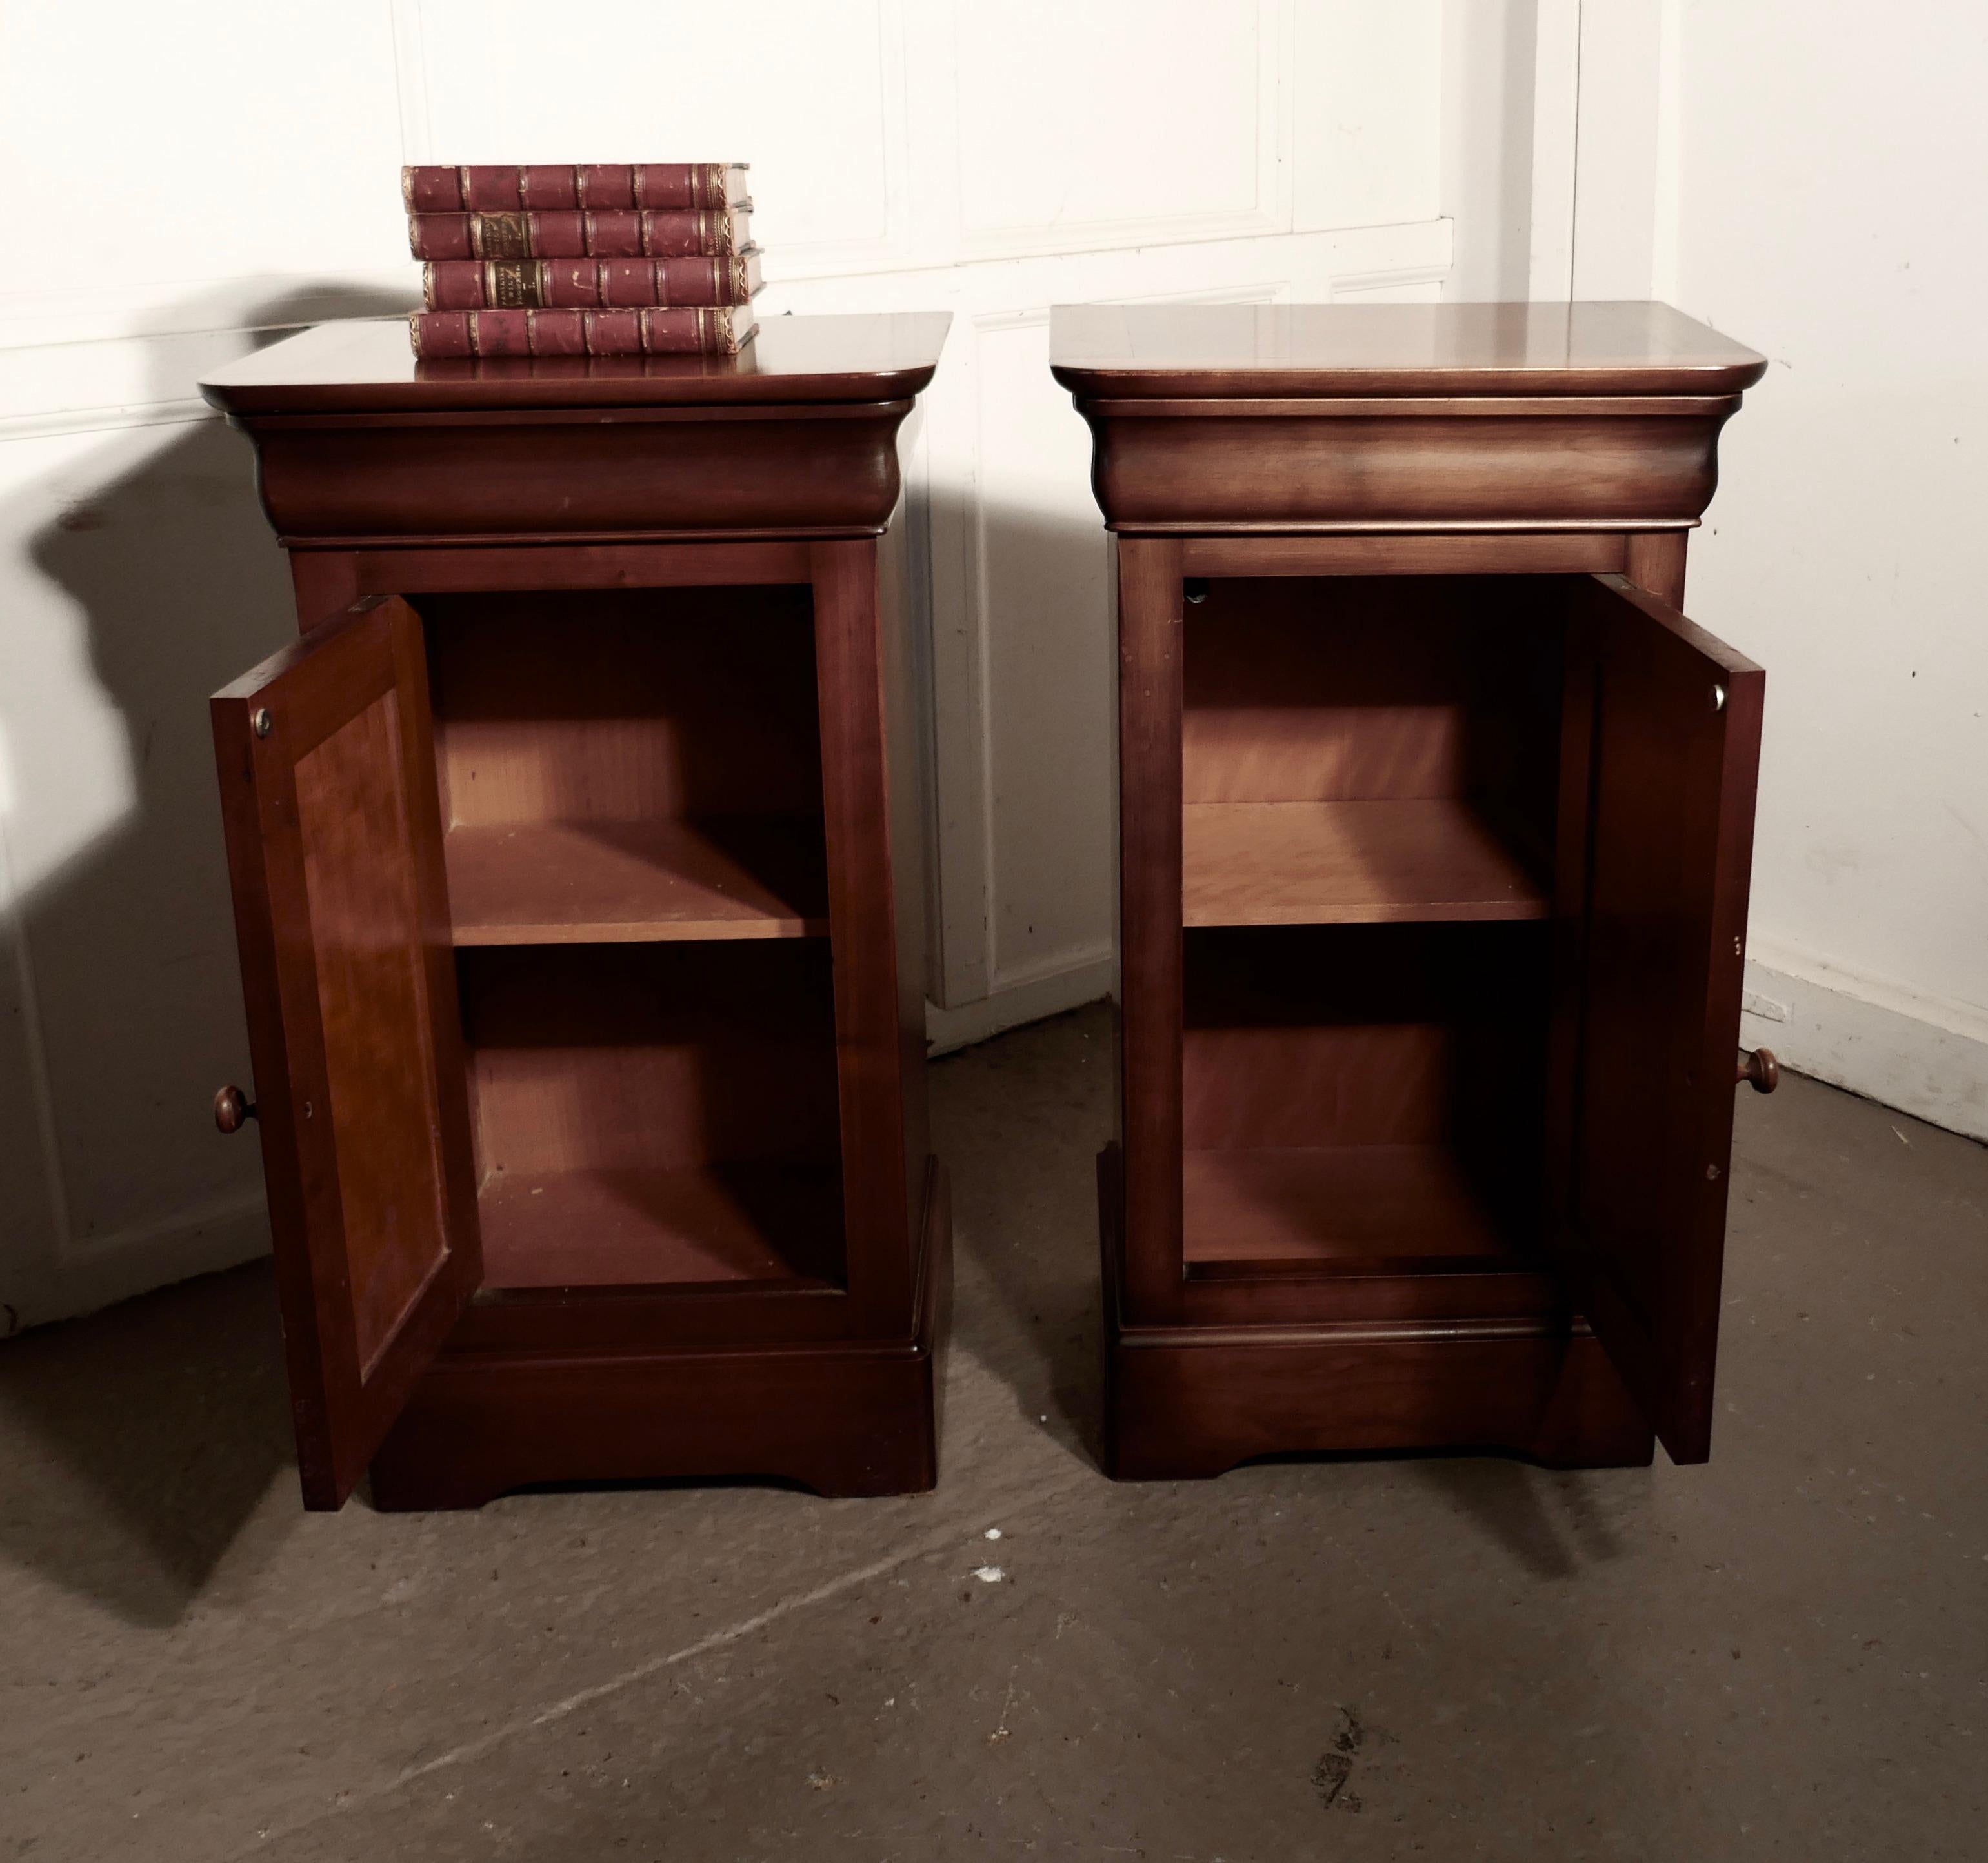 A pair of French cherrywood bedside cupboards or night tables

These are very attractive pieces they are made in well figured cherry, they each have a panelled Door to the front with a concealed drawer over, there is a shelf inside, and they stand